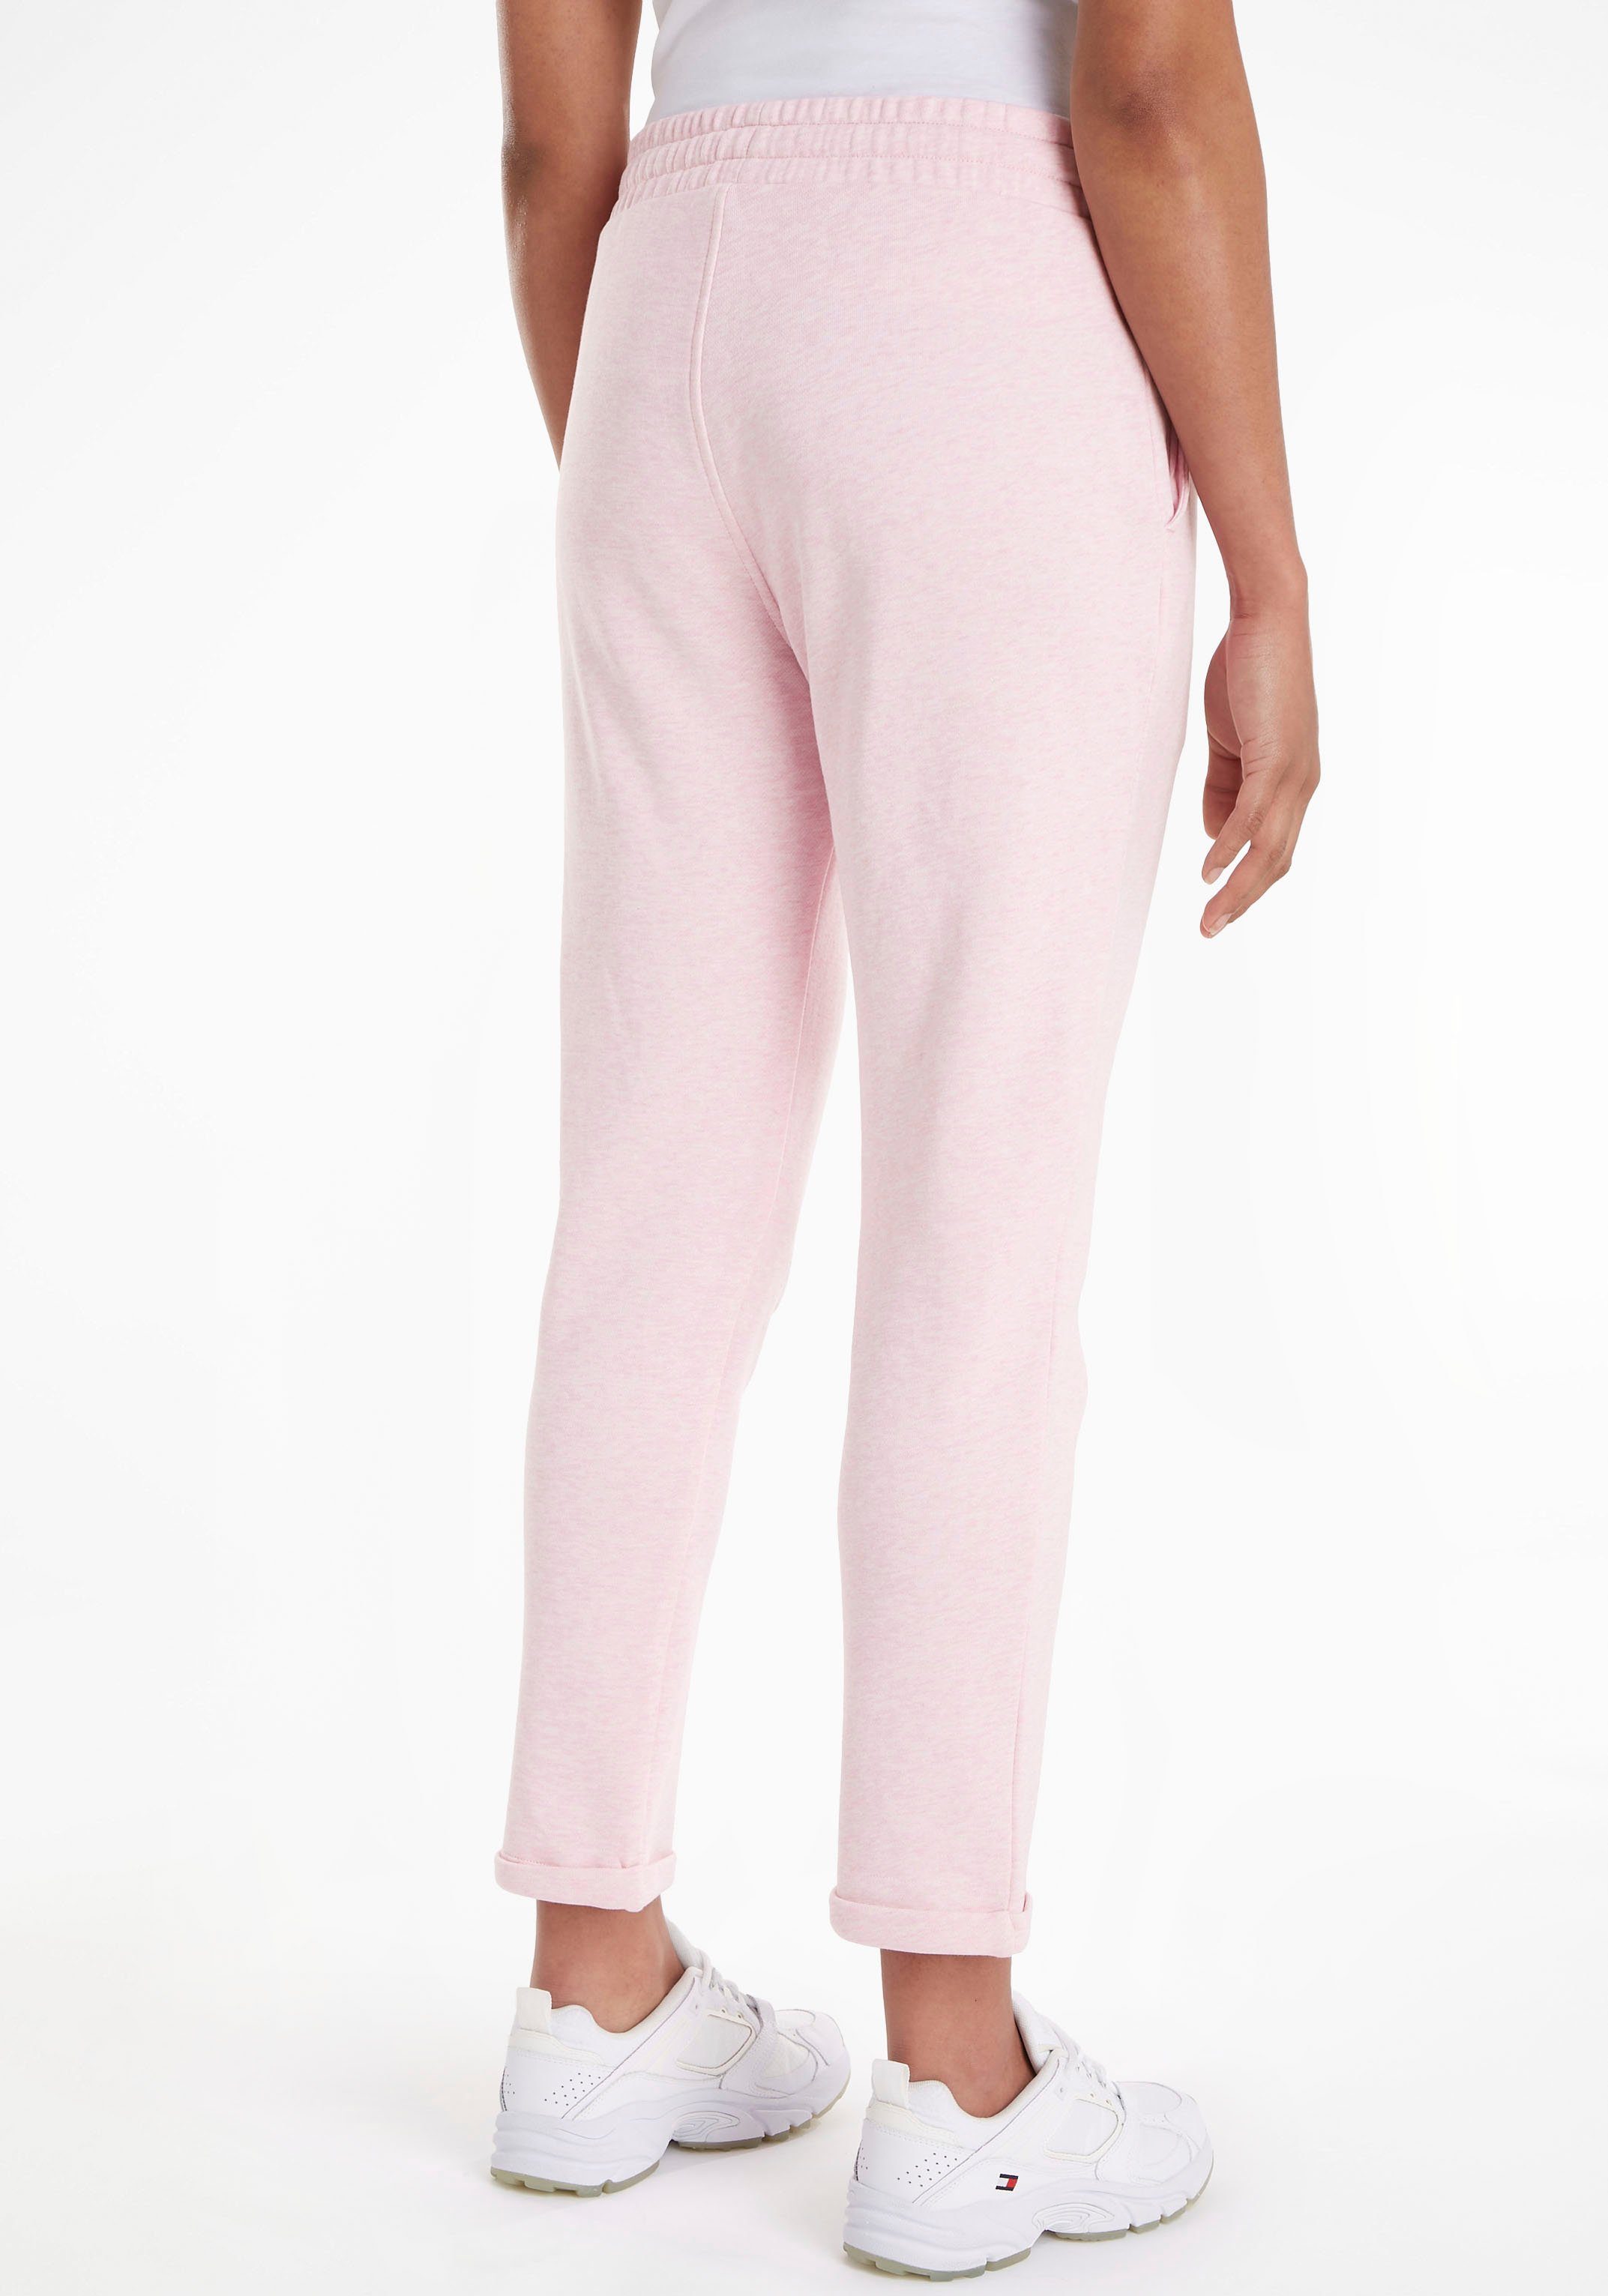 Tommy Hilfiger Sweatpants TAPERED ROUNDALL SWEATPANTS Hilfiger mit Tommy Markenlabel Classic-Pink-Heather NYC